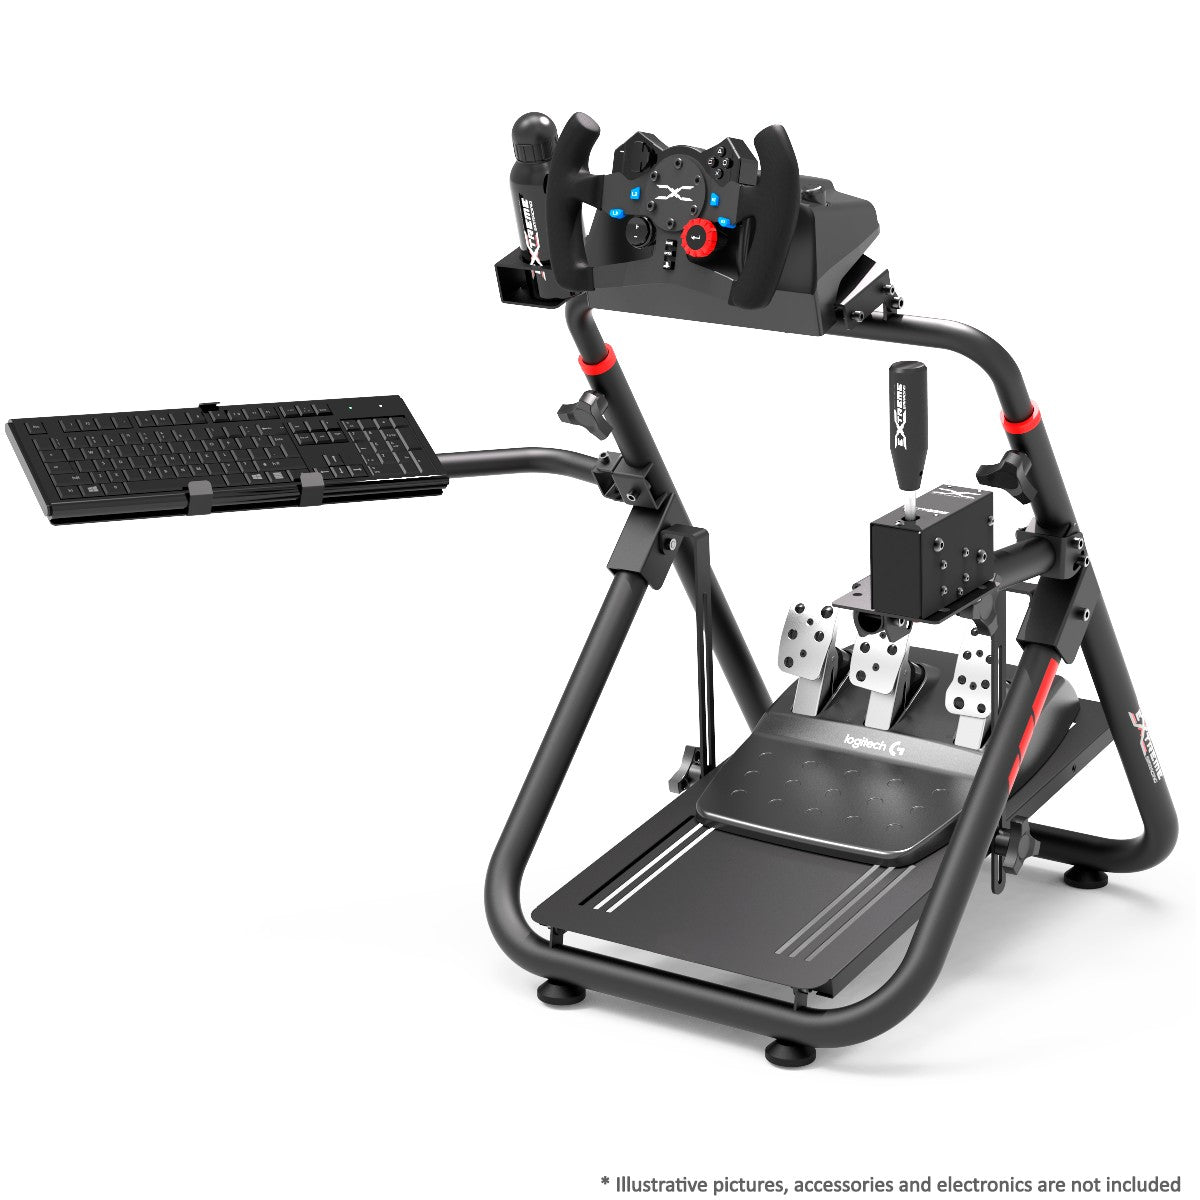  Extreme Sim Racing Wheel Stand Cockpit SXT V2 Racing Simulator  - Racing Wheel Stand Black Edition For Logitech G25, G27, G29, G920,  Thrustmaster And Fanatec - Heavy Dutty and Foldable 